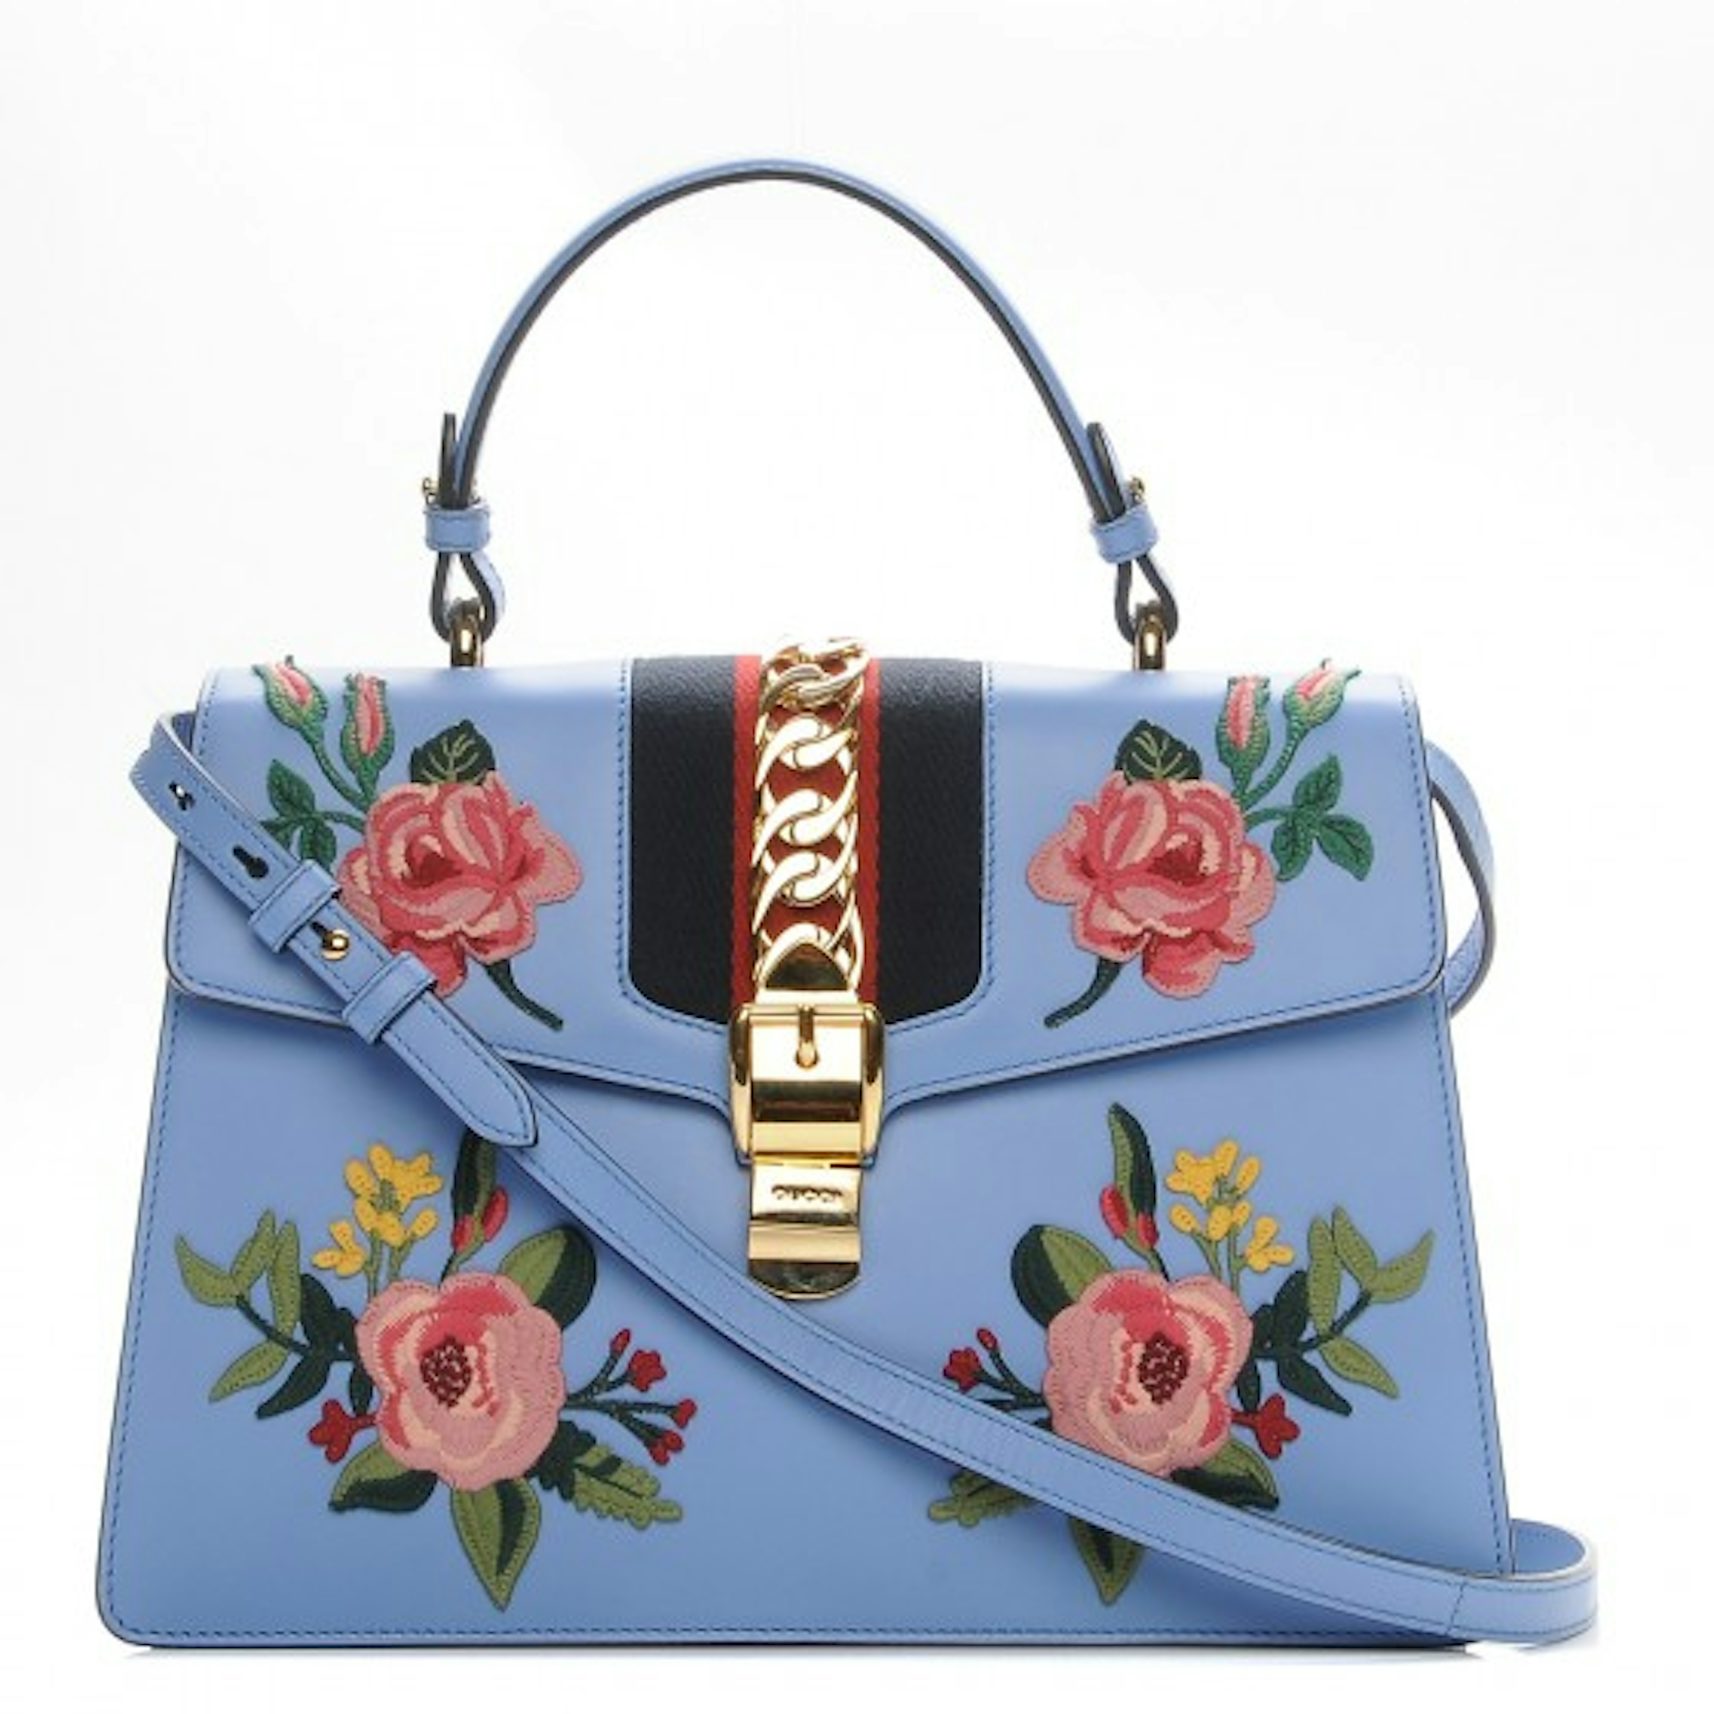 Gucci Sylvie Embroidered Top Handle Bag with Shoulder Strap